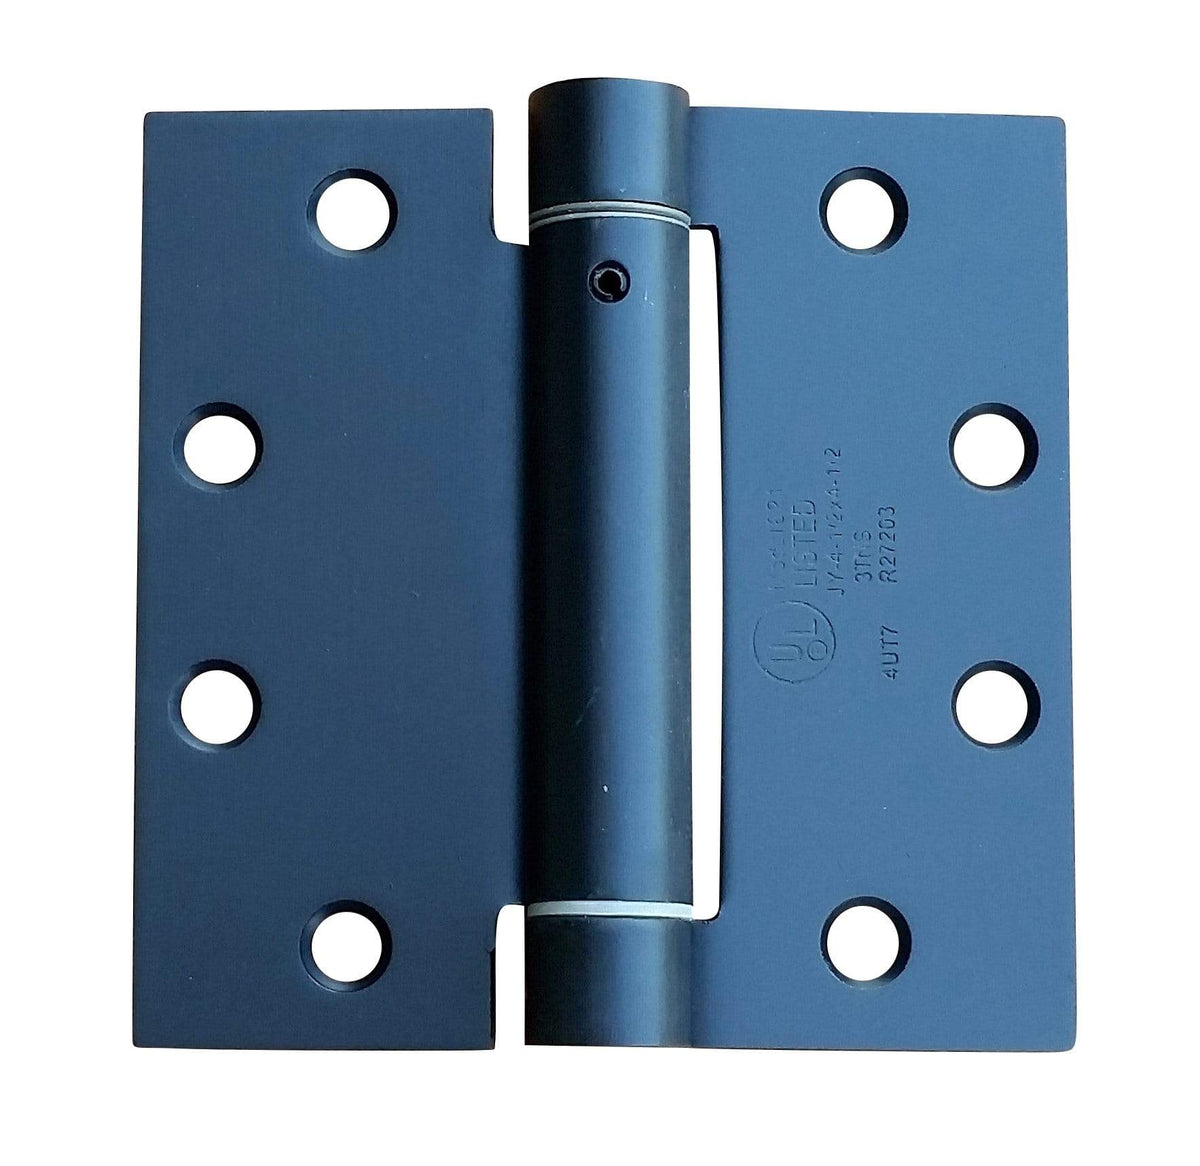 Commercial Black Stainless Steel Spring Hinges - 4 1/2" X 4 1/2" With Square Corner - 2 Pack